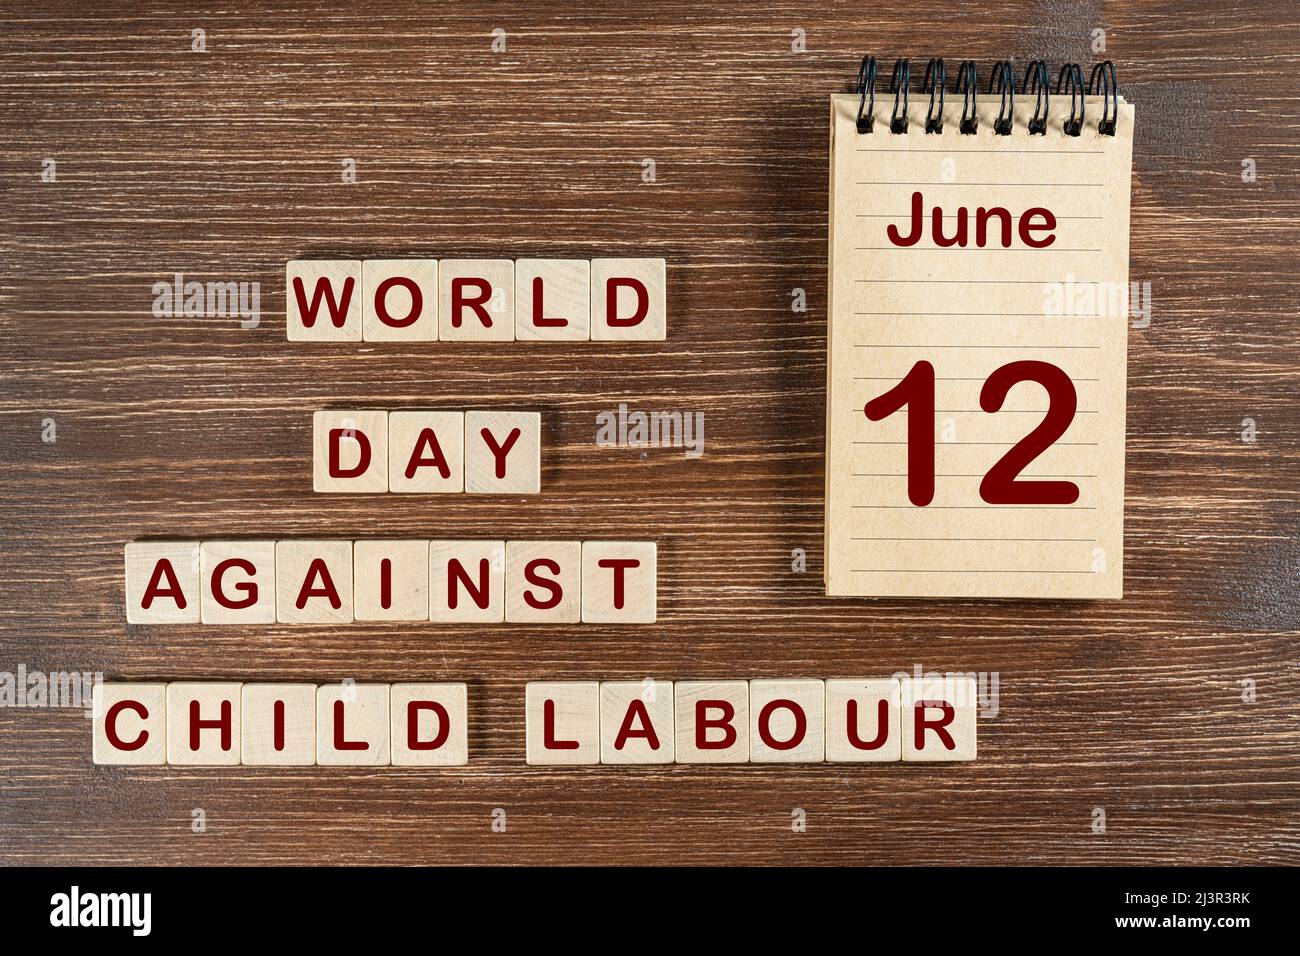 The celebration of the   World Day Against Child Labour the June 12 Stock Photo